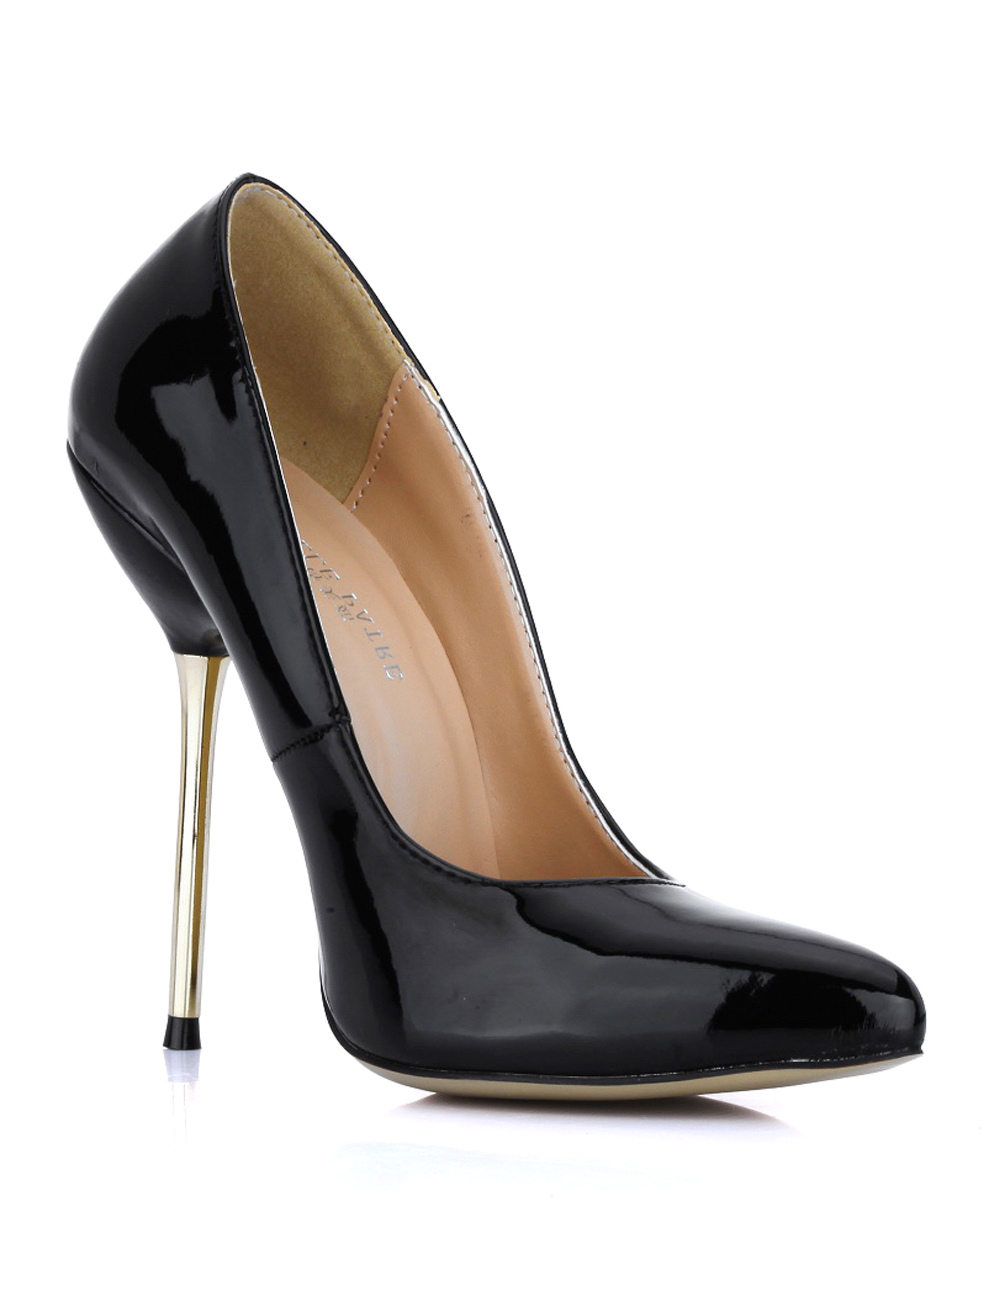 Sexy Black Pointed Toe Stiletto Heel Patent Leather Womans High Heels 